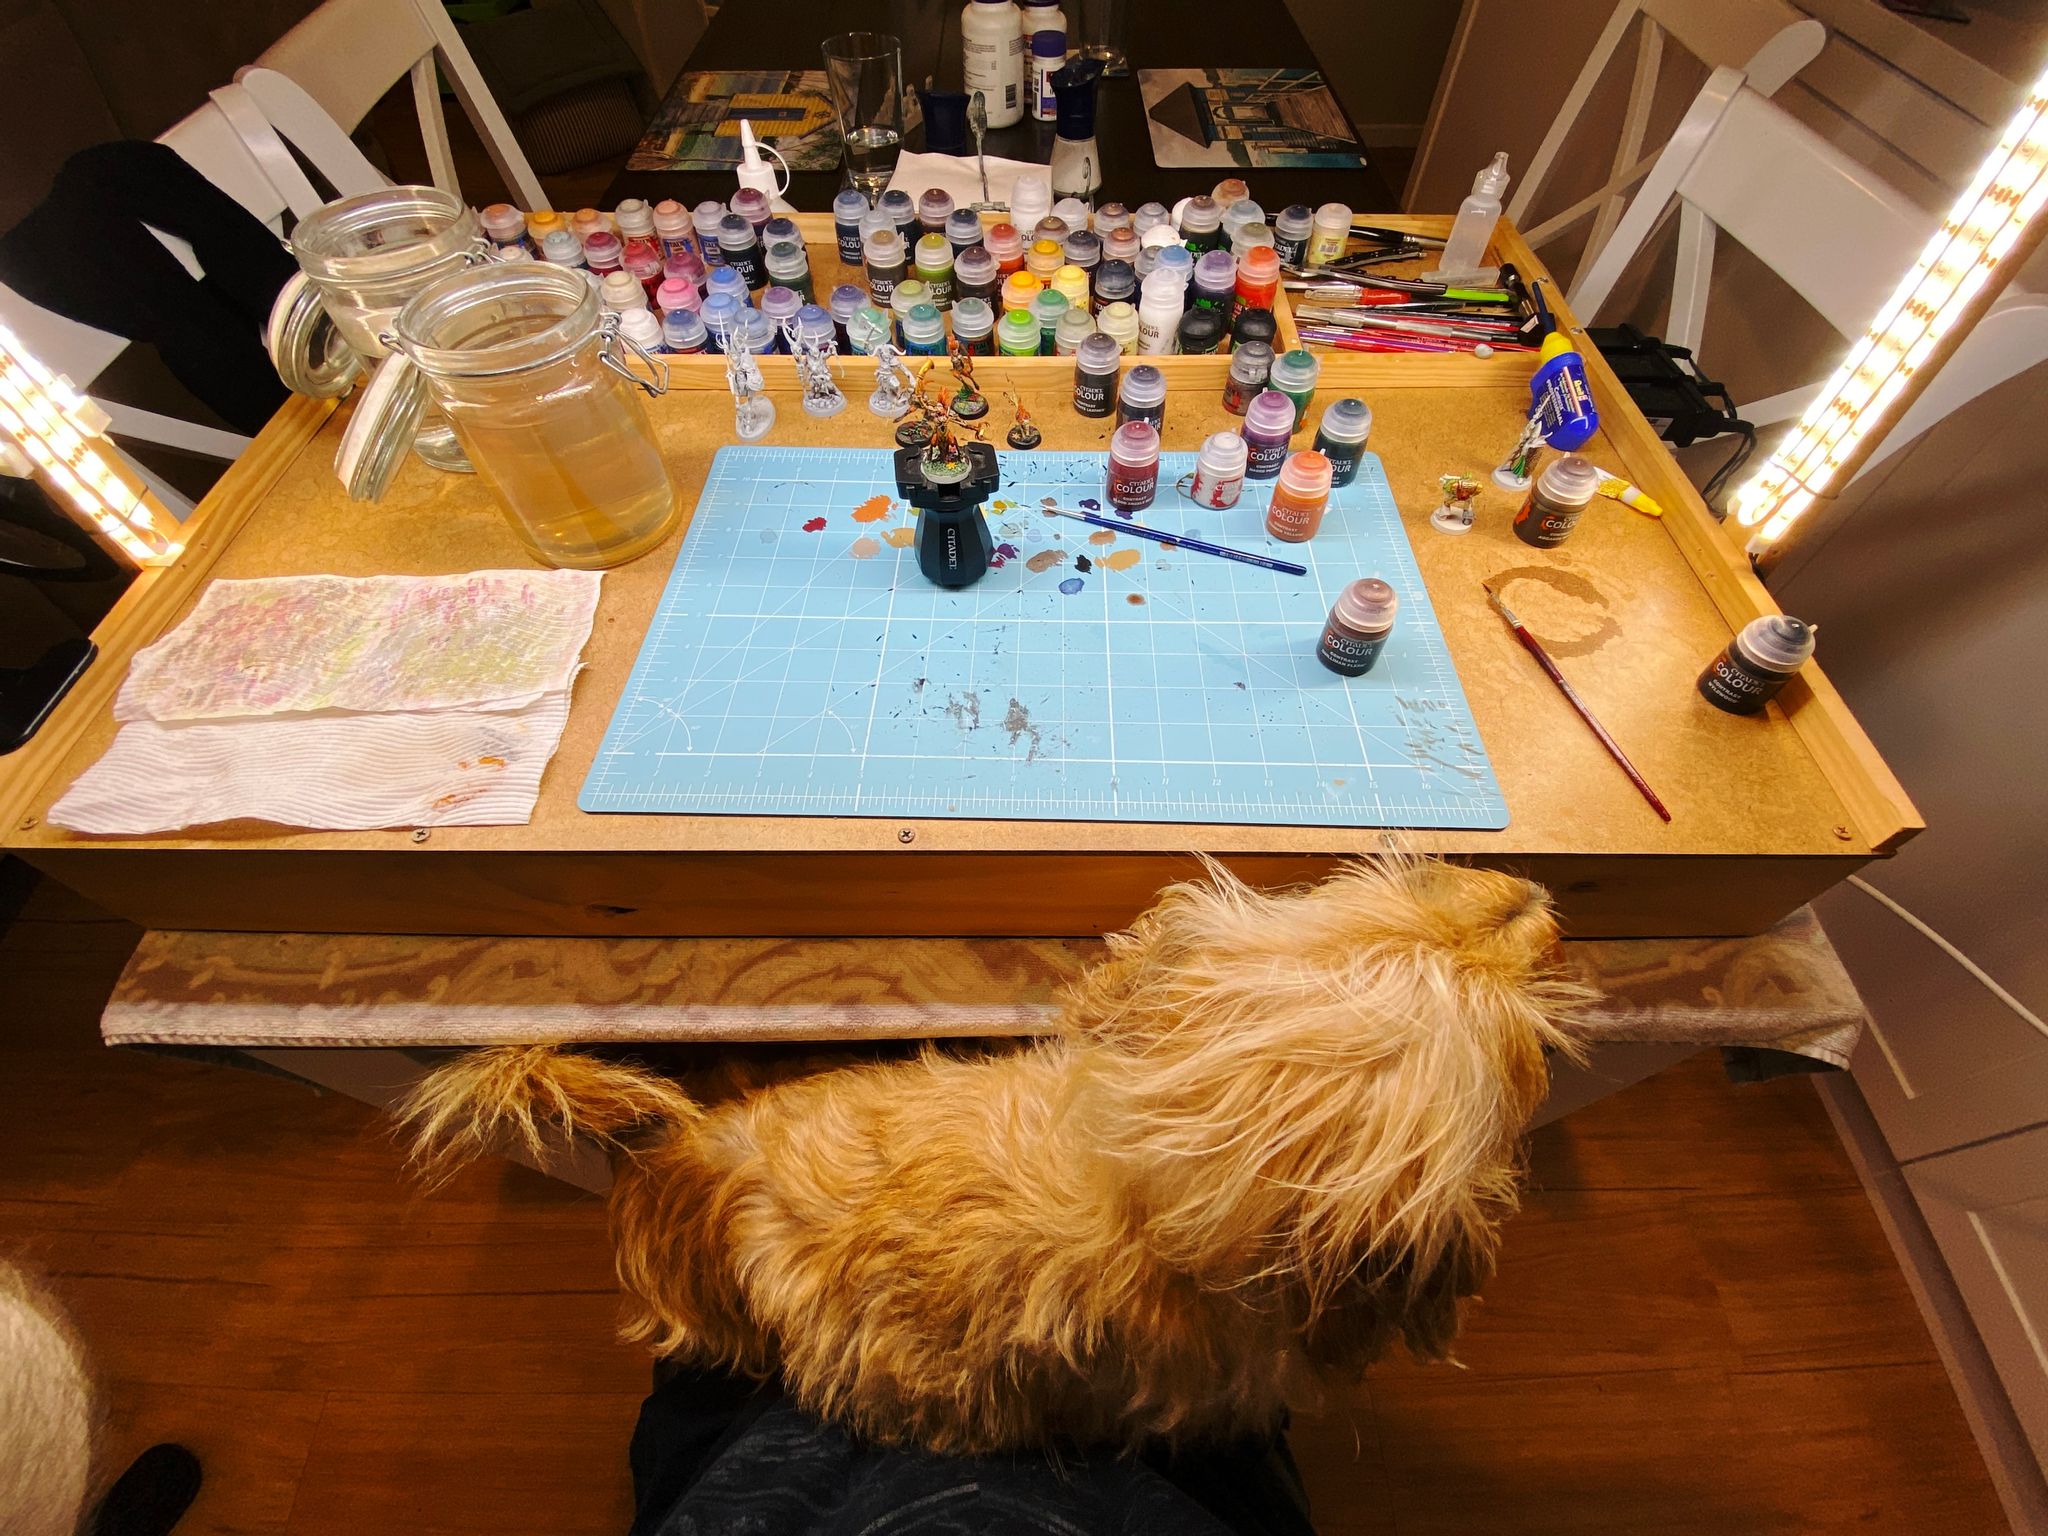 A photo taken from my point of view, showing my painting table with paints and some miniatures on it. A small scruffy blonde dog is sitting in my lap inspecting what's on the table.